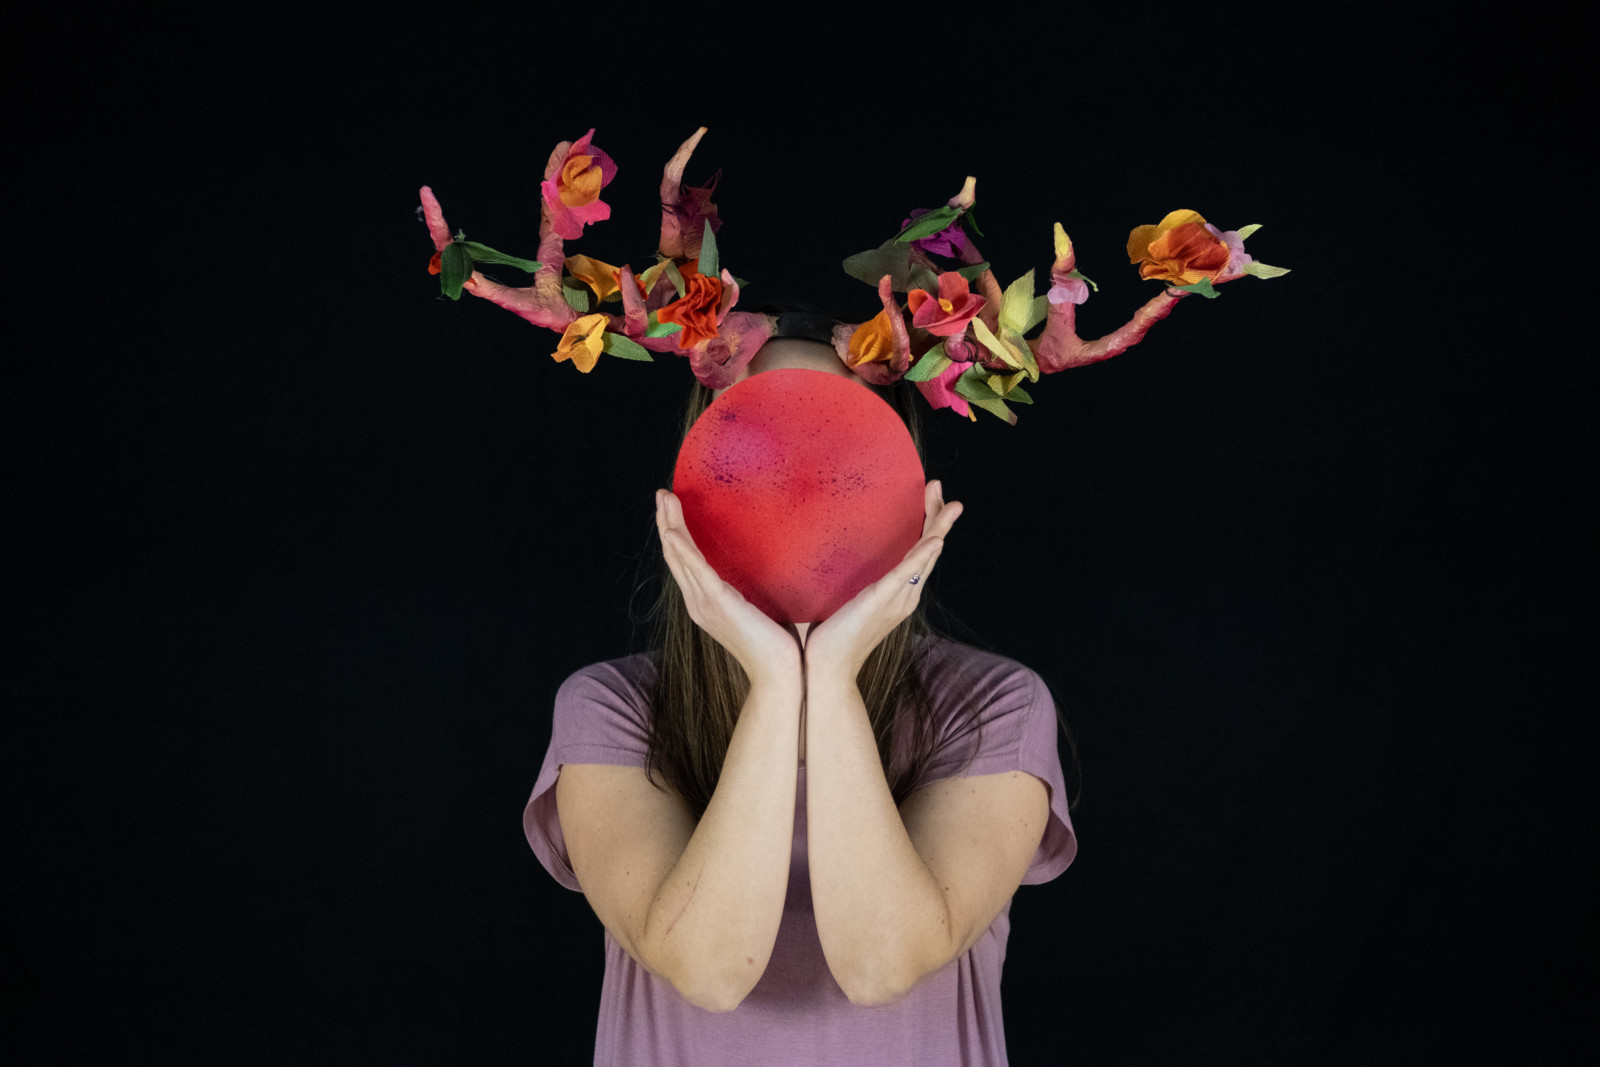 Woman wearing hand made floral antlers, holding hand made red moon covering her face.